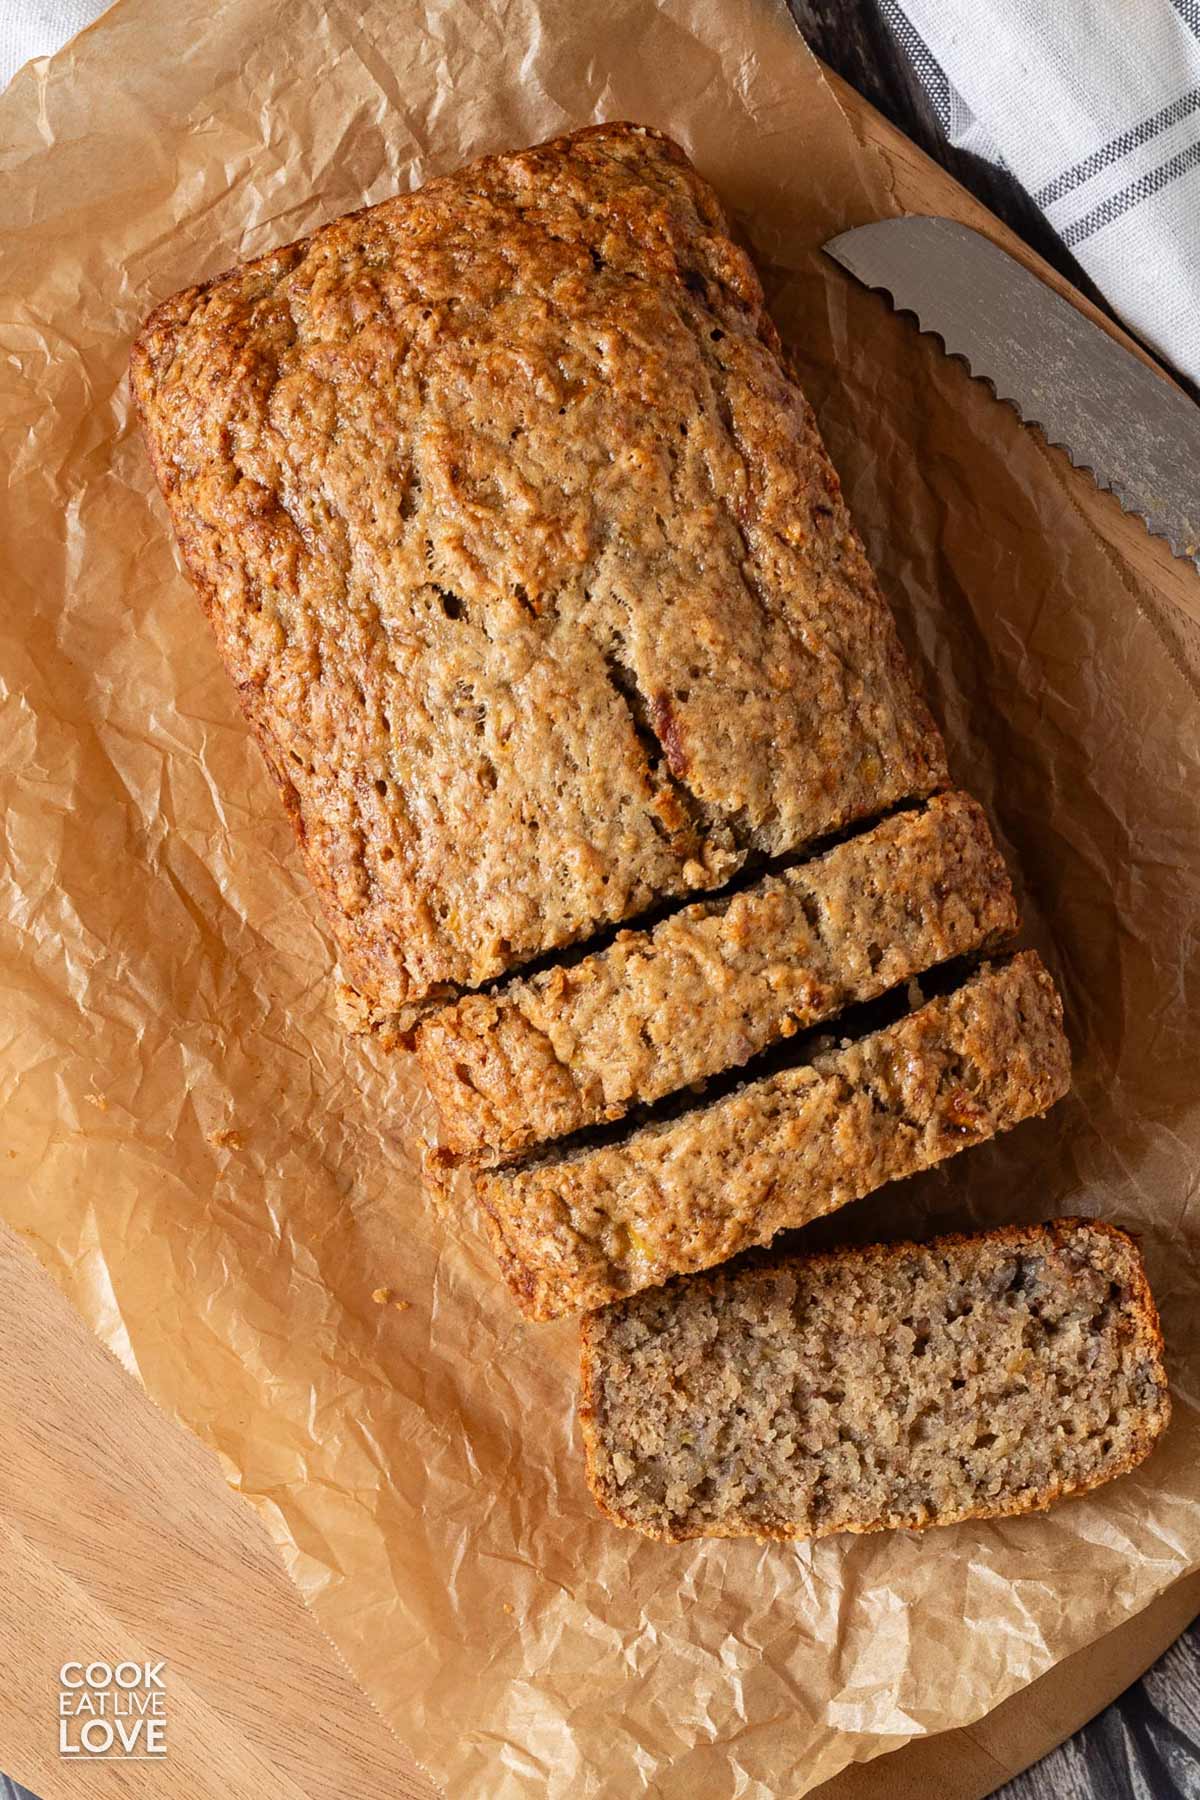 A loaf of no butter banana bread on the table with three slices cut and one laying over on its side.